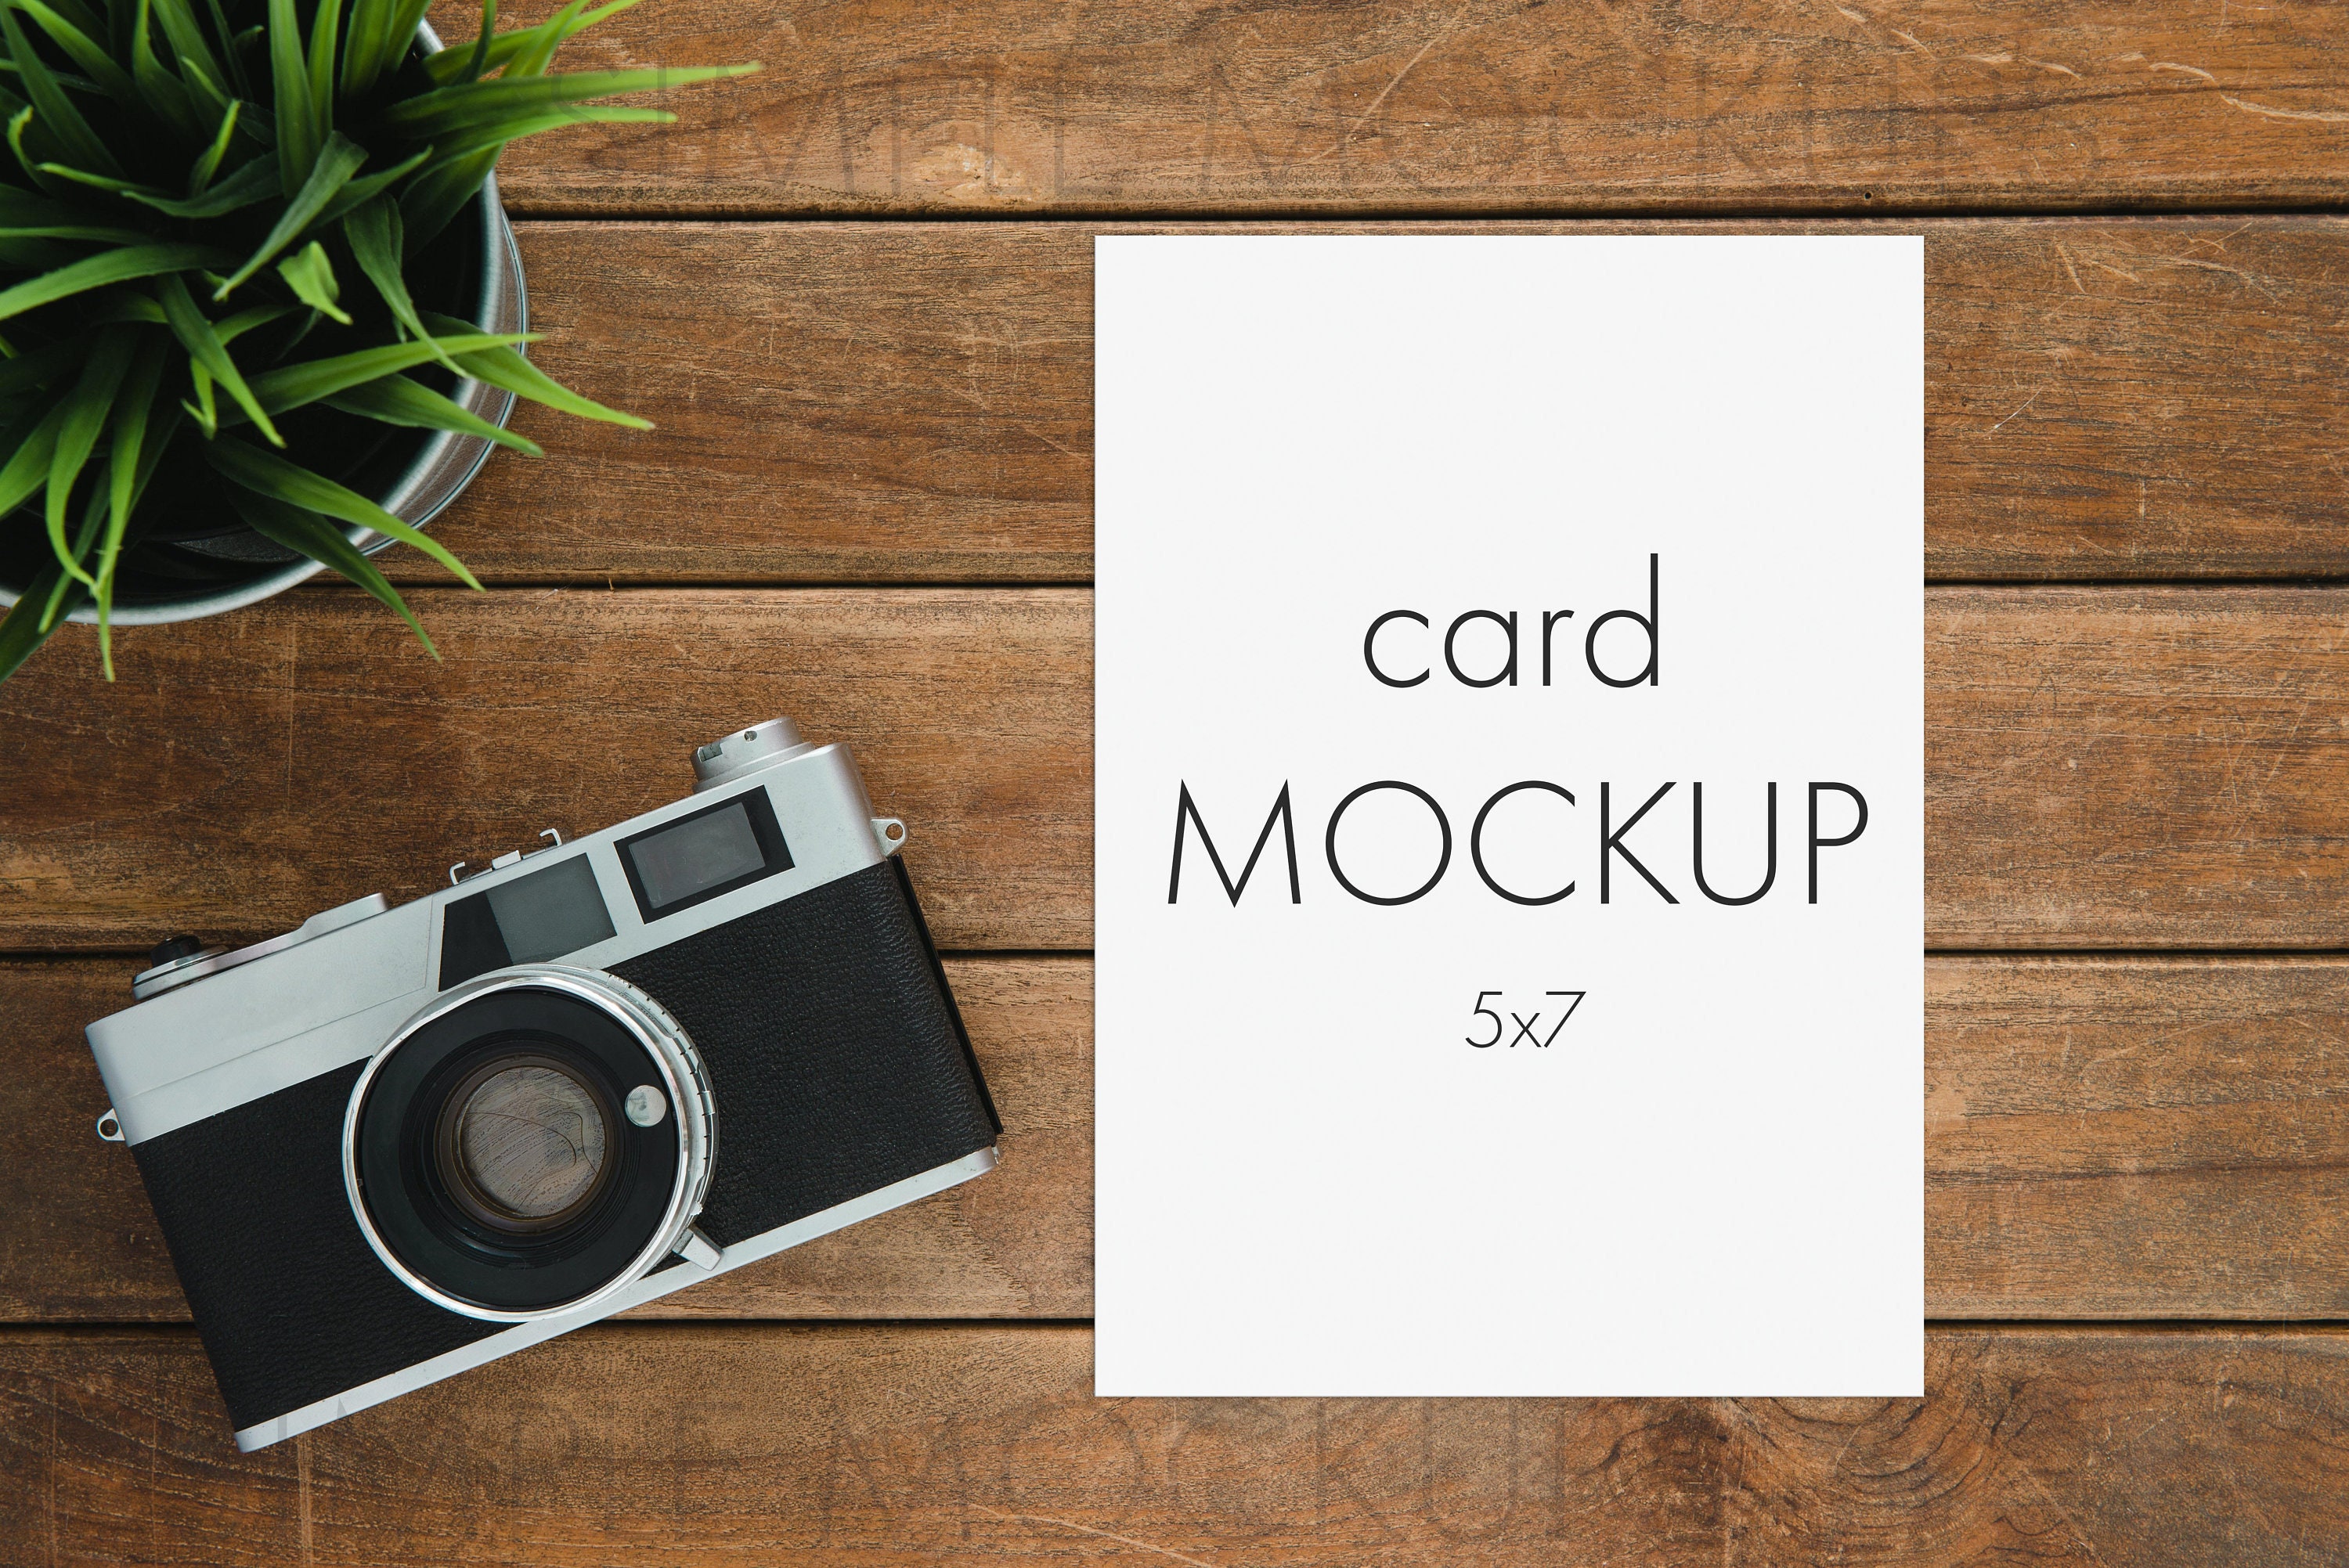 Download Card Mockup on a Wood Background for 5x7 or A7 Ratio ...